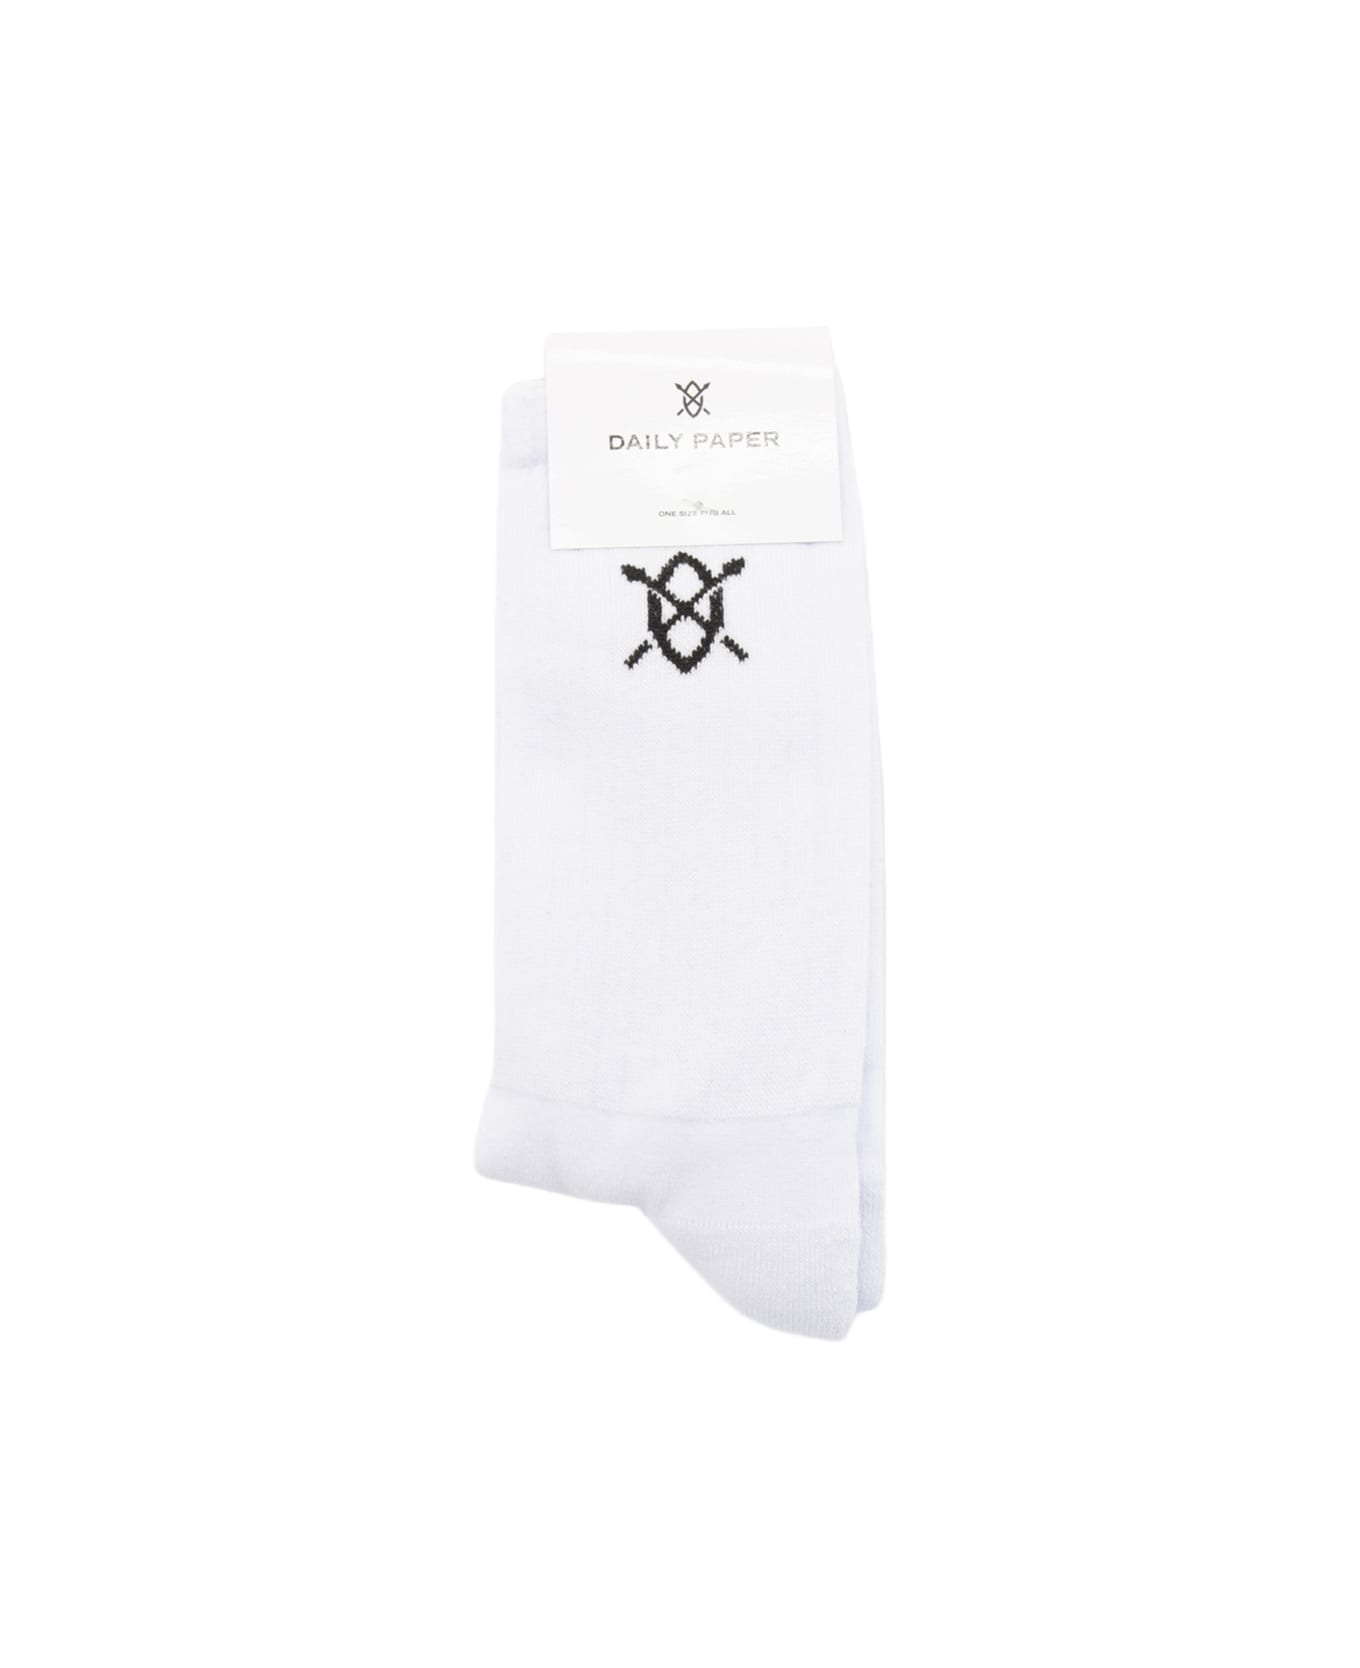 Daily Paper White Cotton Blend Socks 靴下